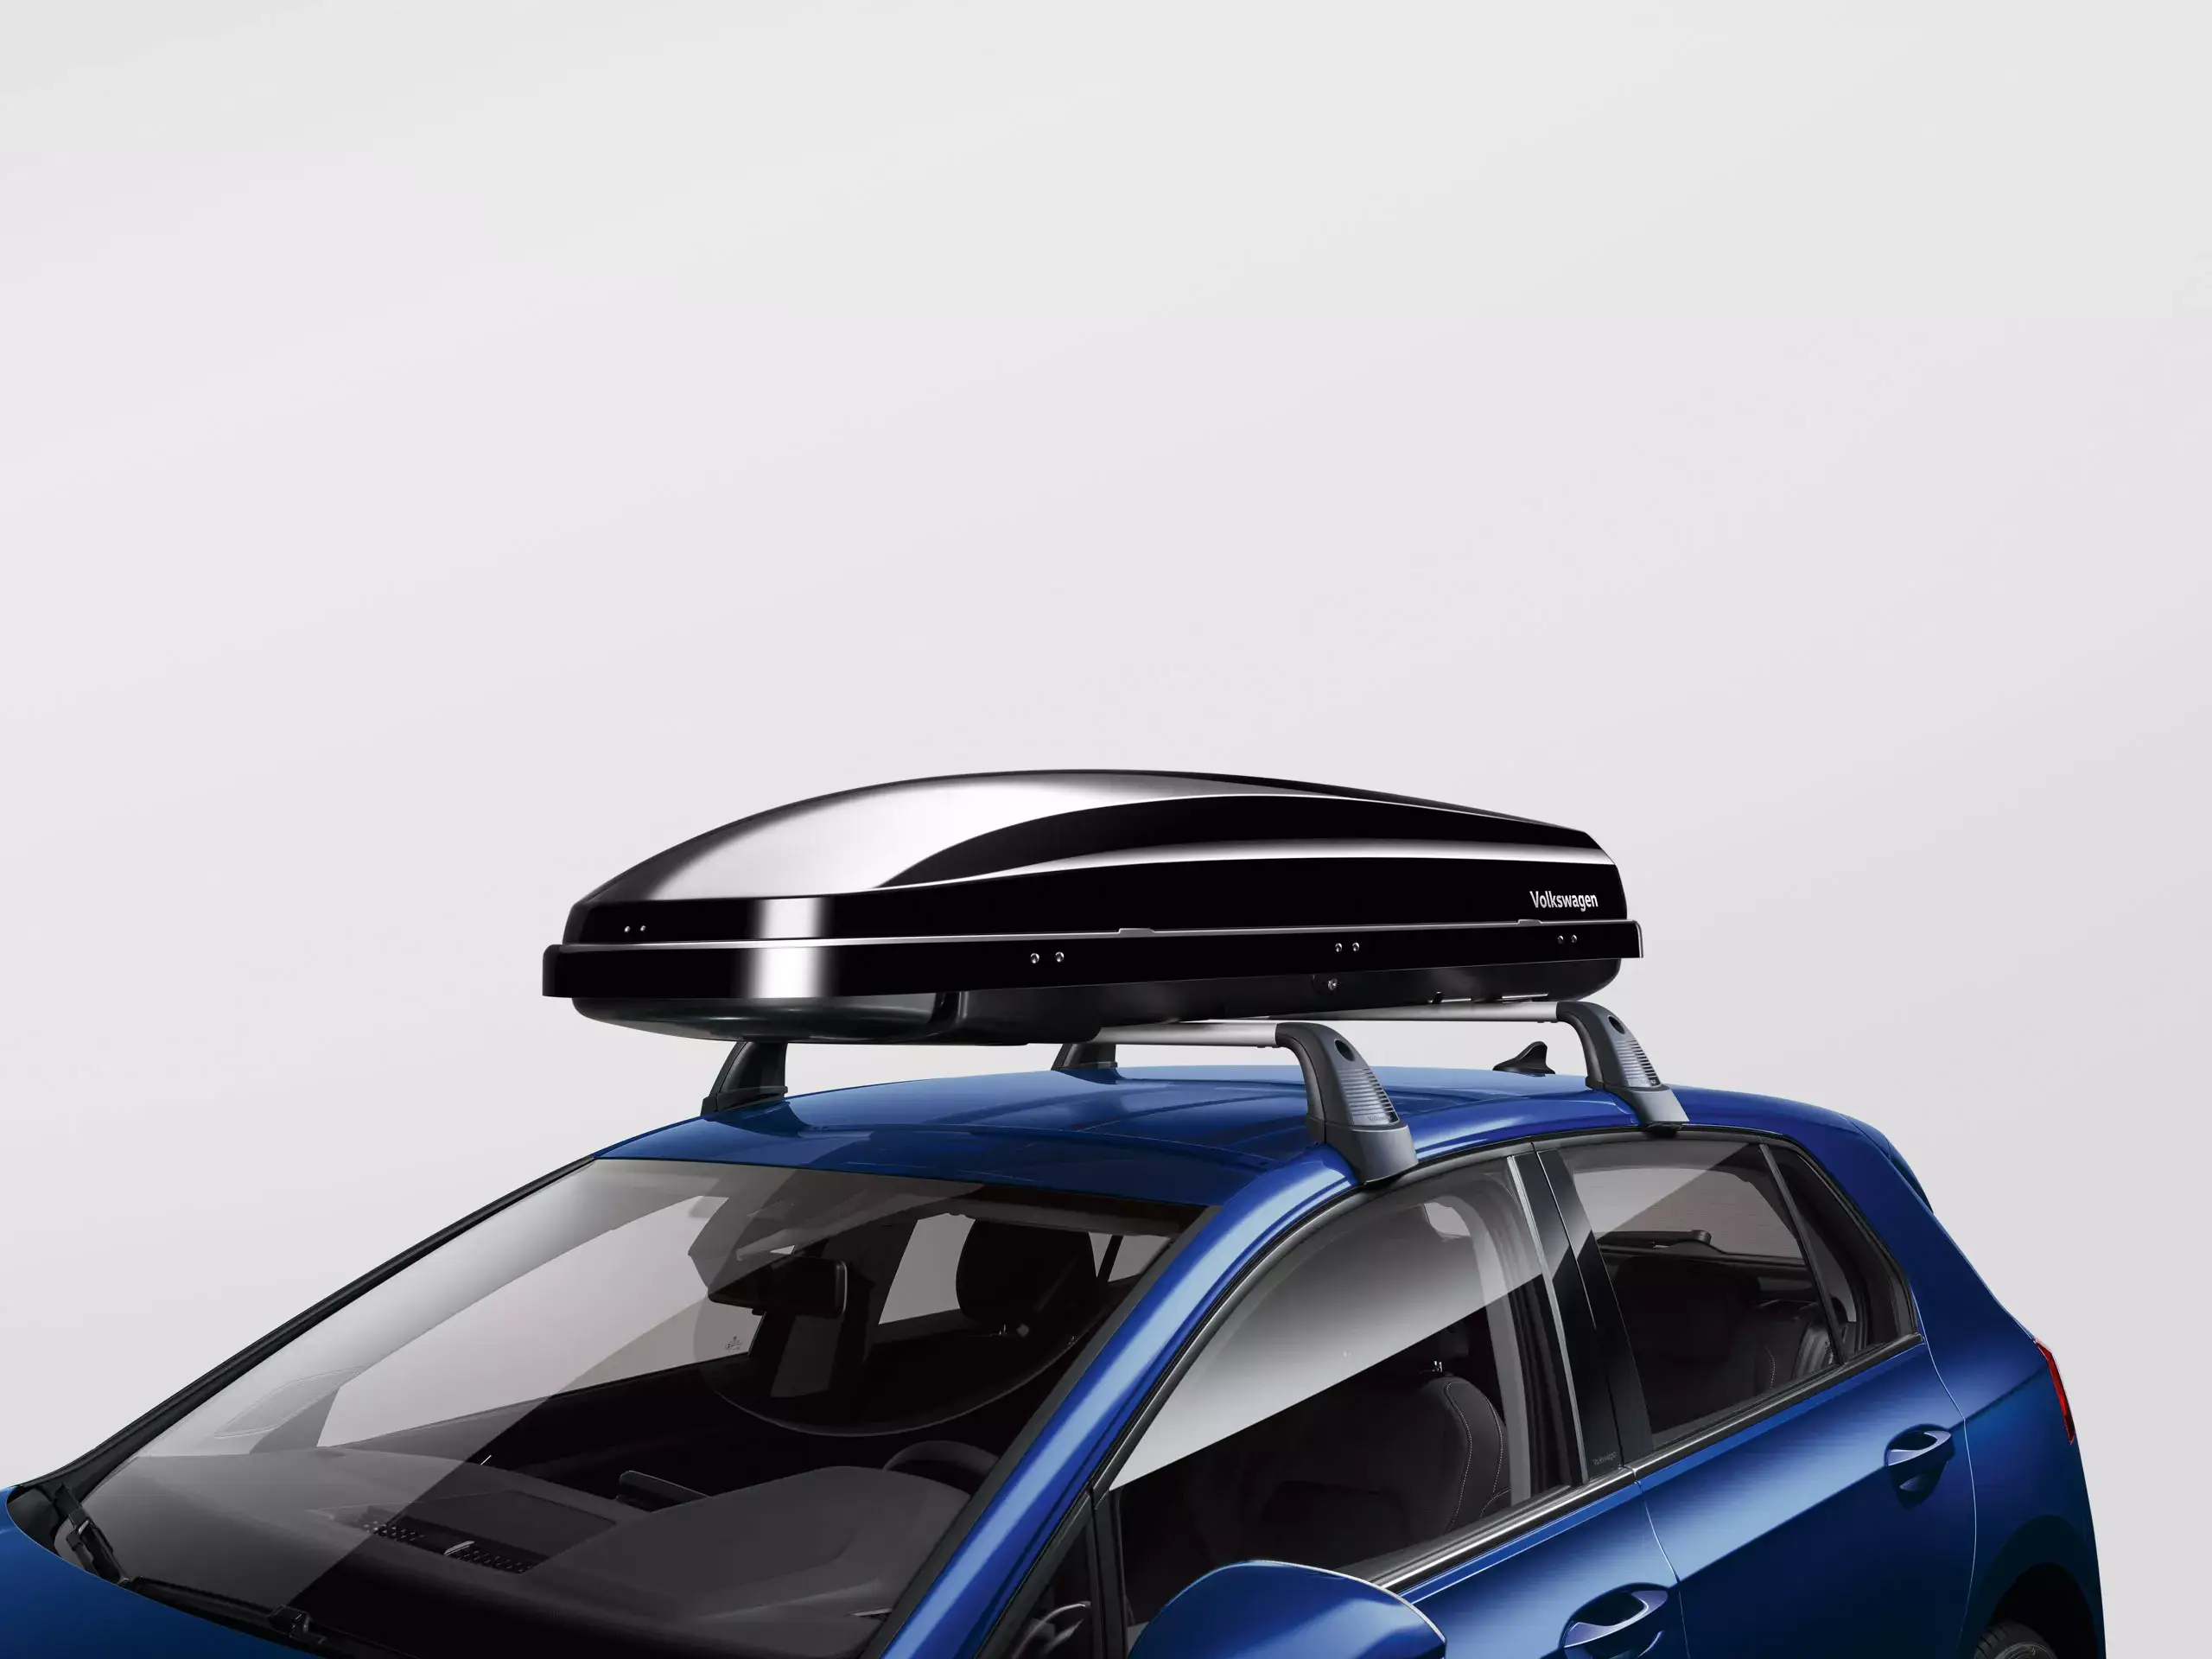 Roof box (340 and 460L capacities)